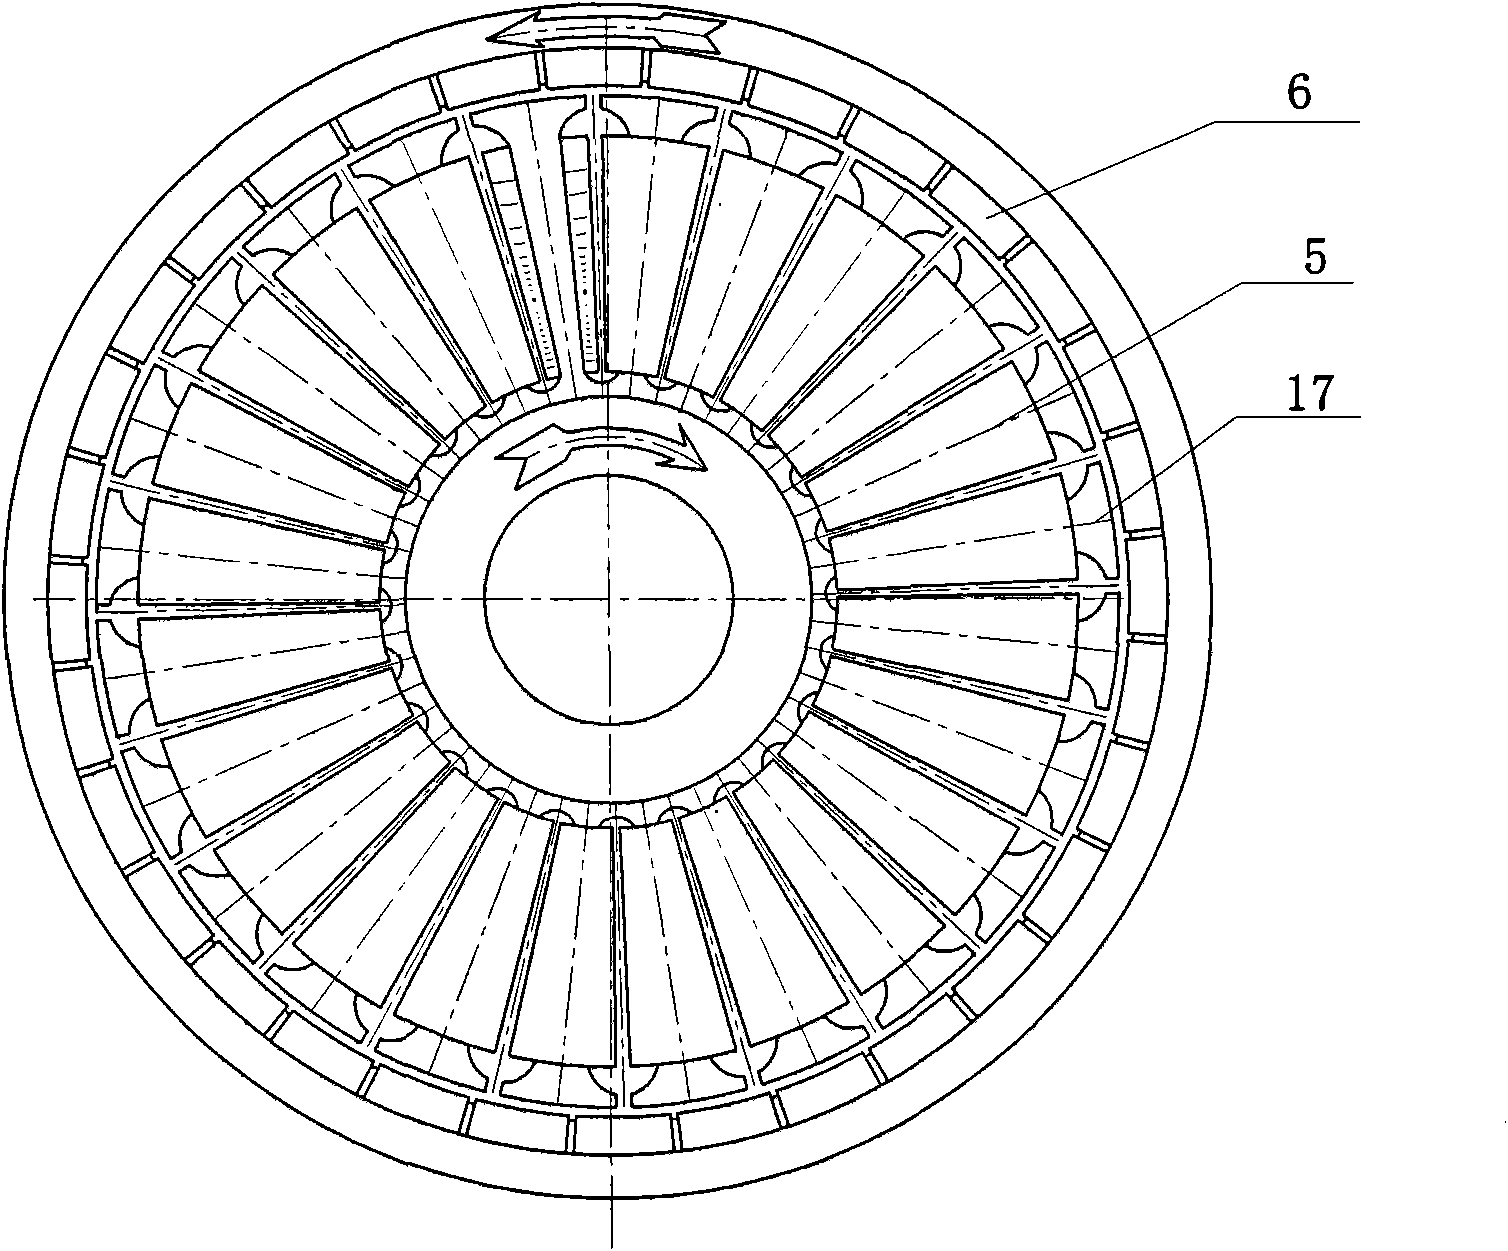 Direct-driven front and back wind wheel contra-rotating wind driven generator